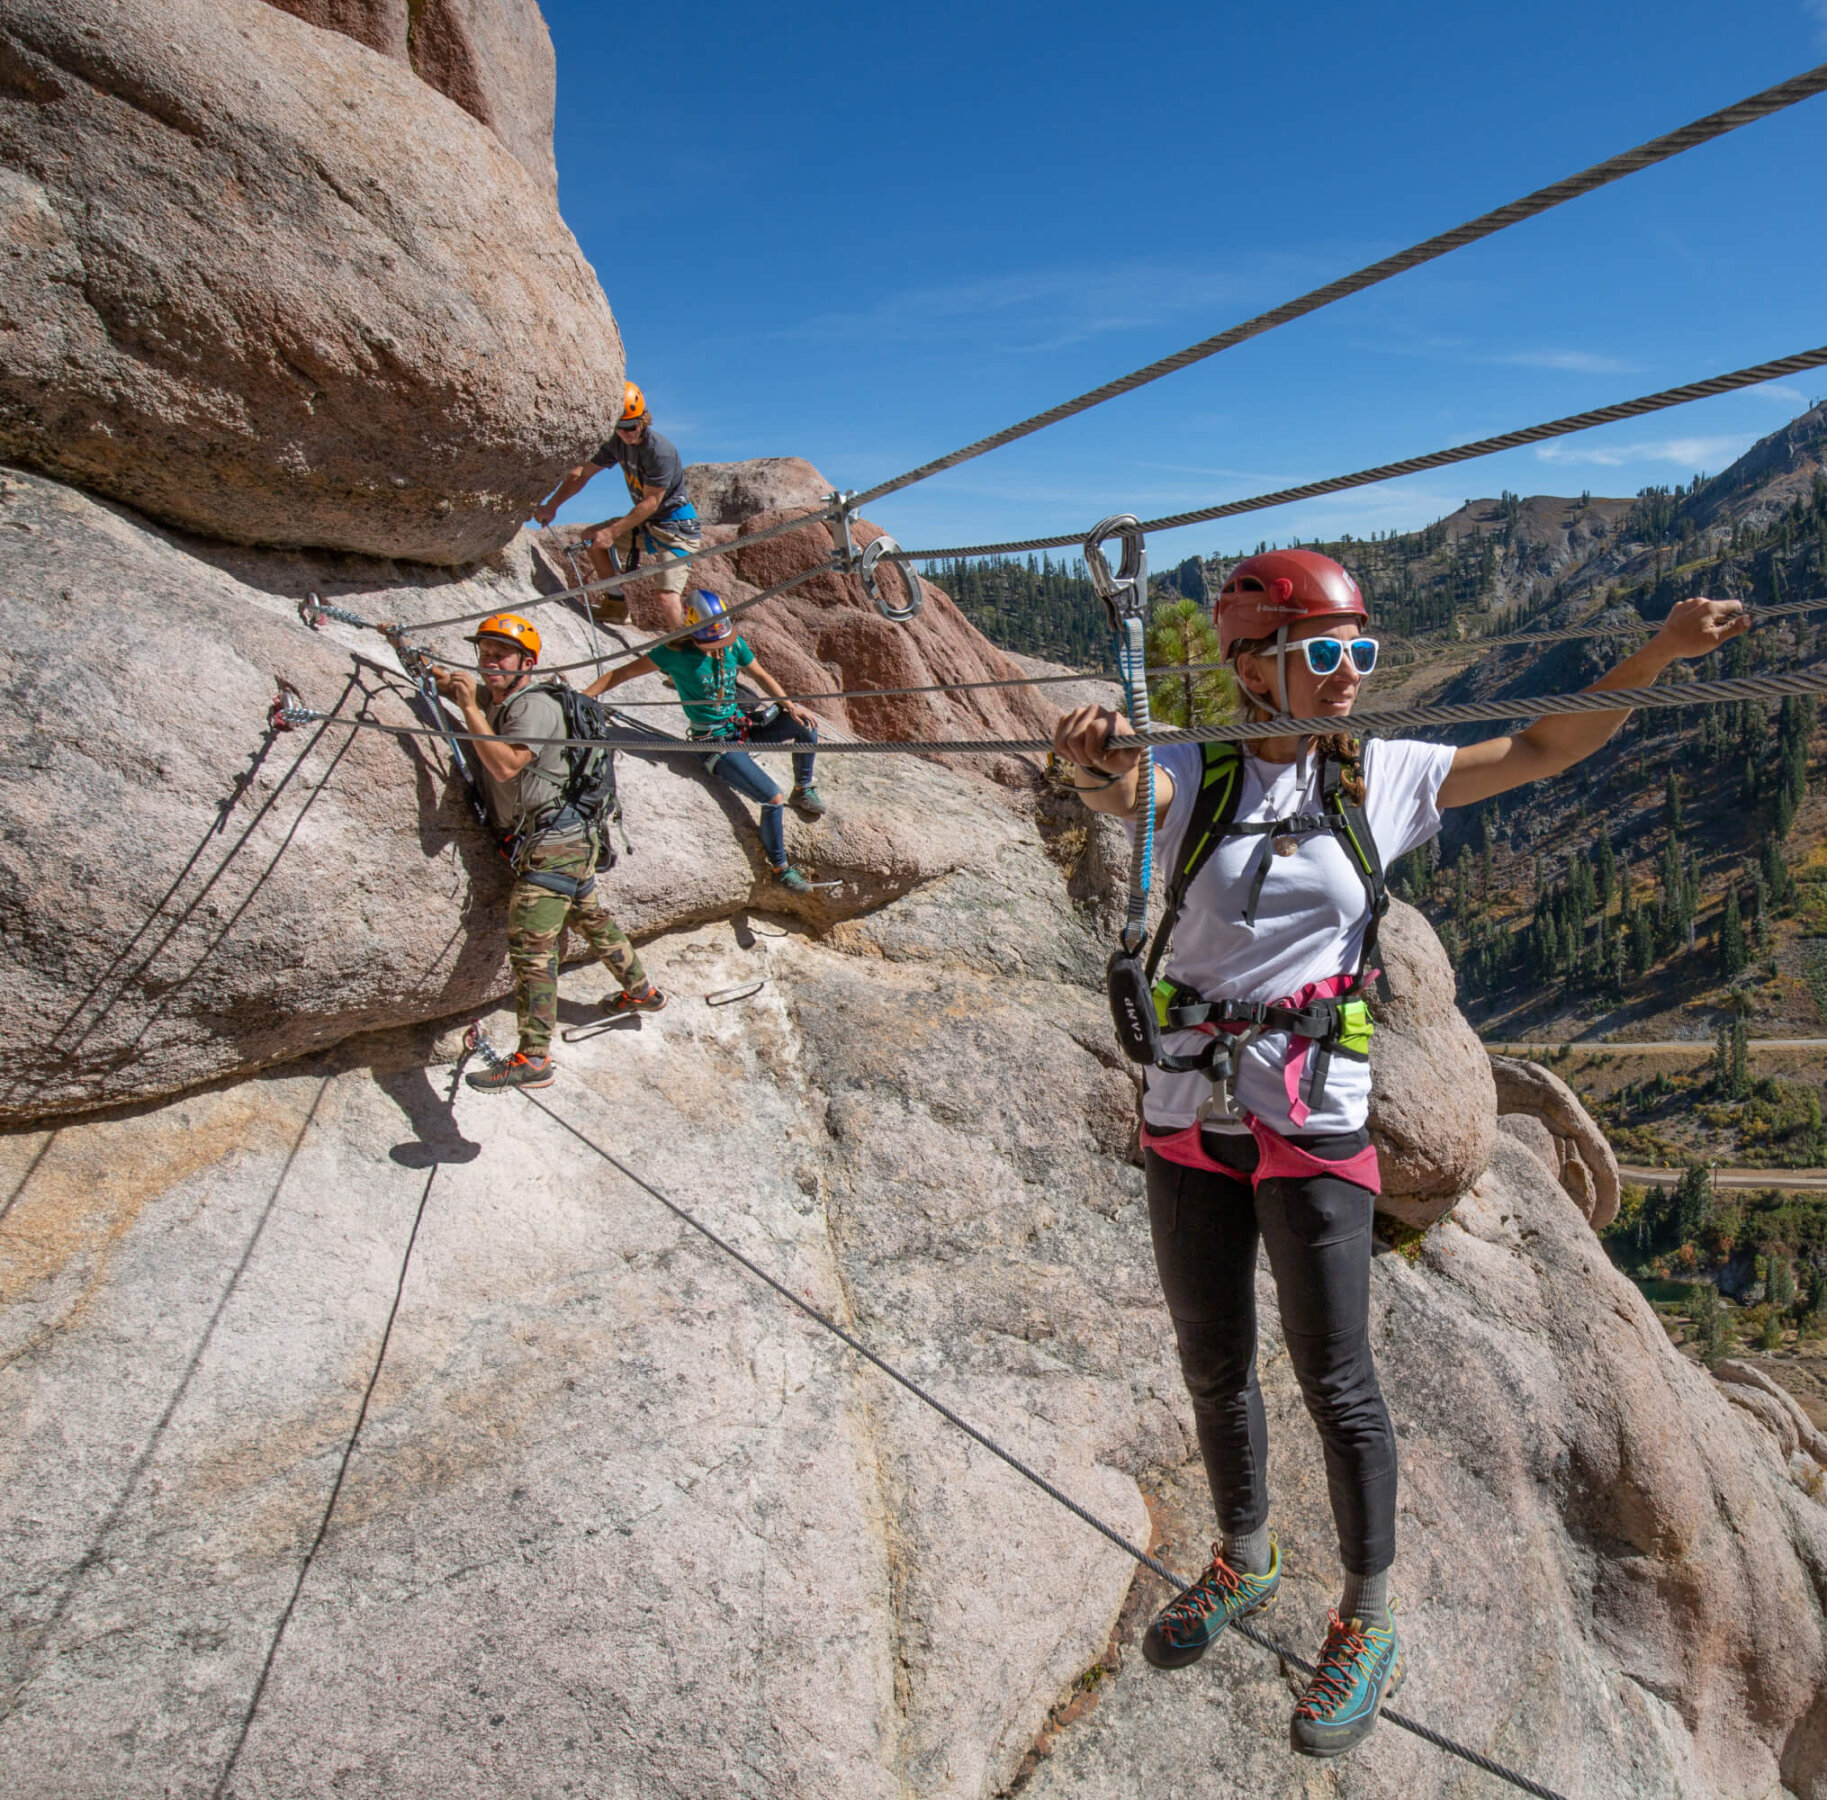 A group of climbers crossing a monkey bridge on the Tahoe Via Ferrata at Palisades Tahoe in Olympic Valley. One of the best Lake Tahoe adventures!